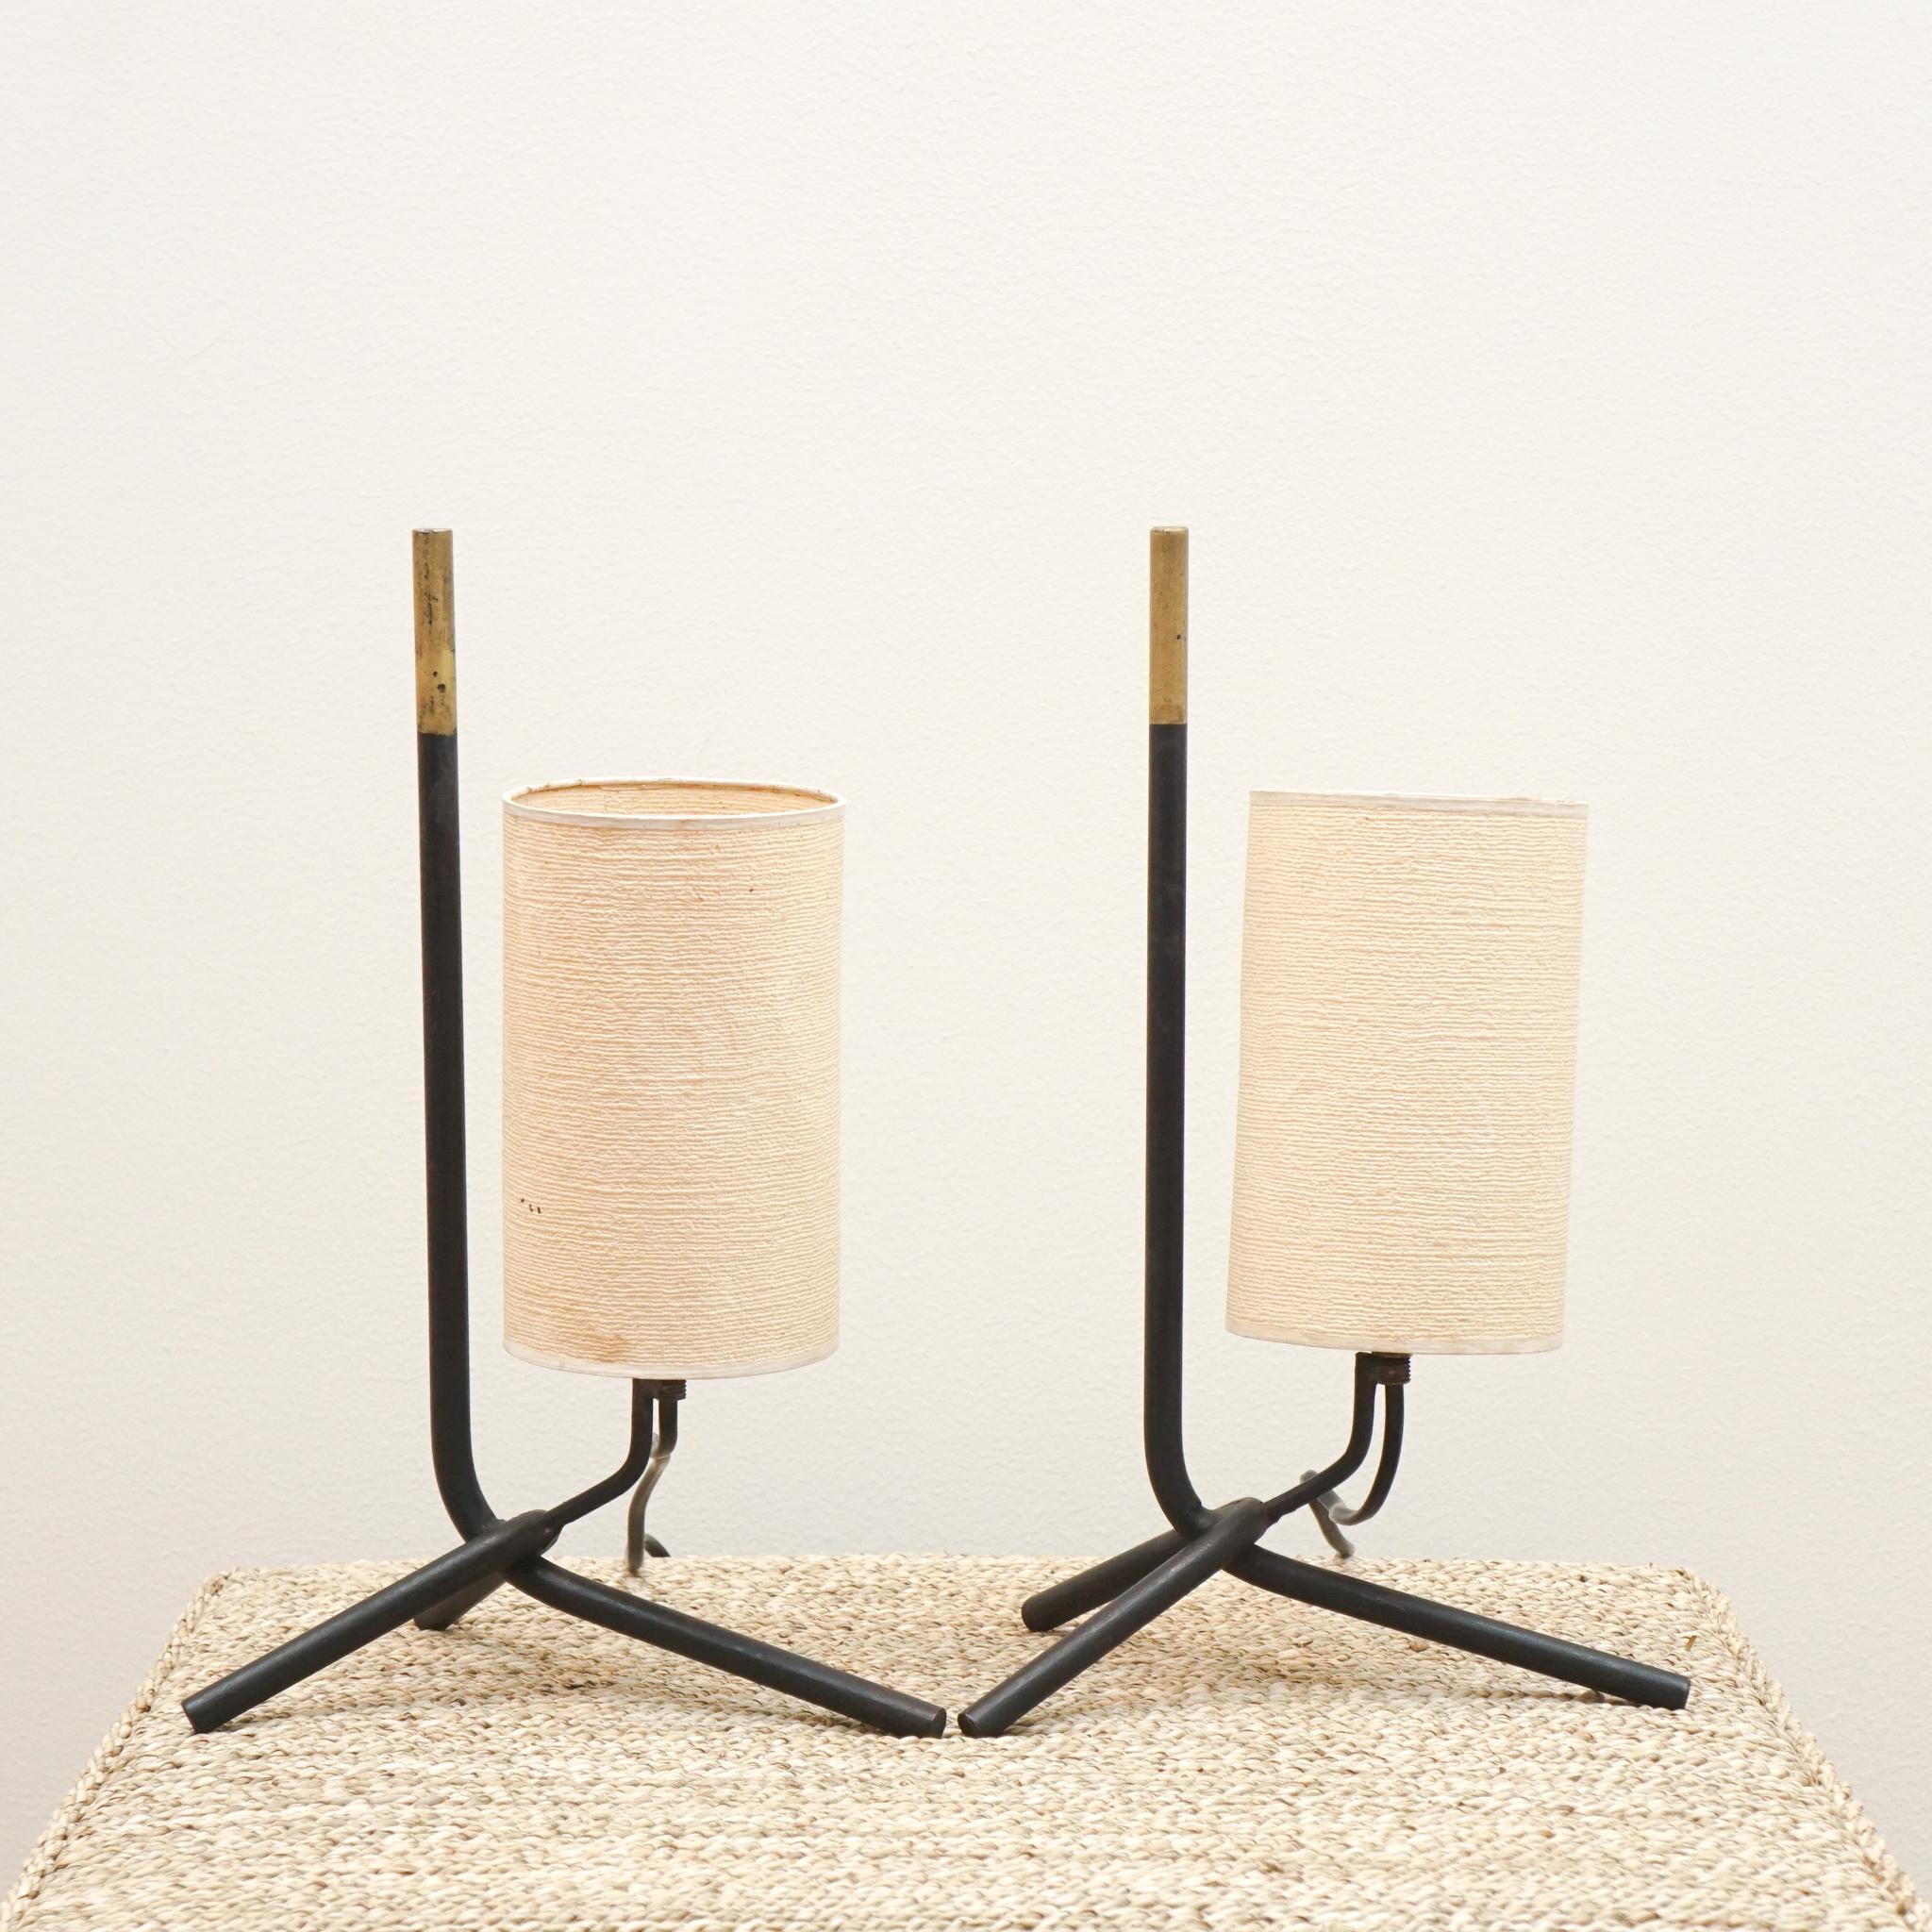 This pair of vintage tripod lamps were sourced in Paris and still have their original shades. Their diminutive size and angular metal stands make them perfect for bedside use. Gold painted detail. Rewired for US.